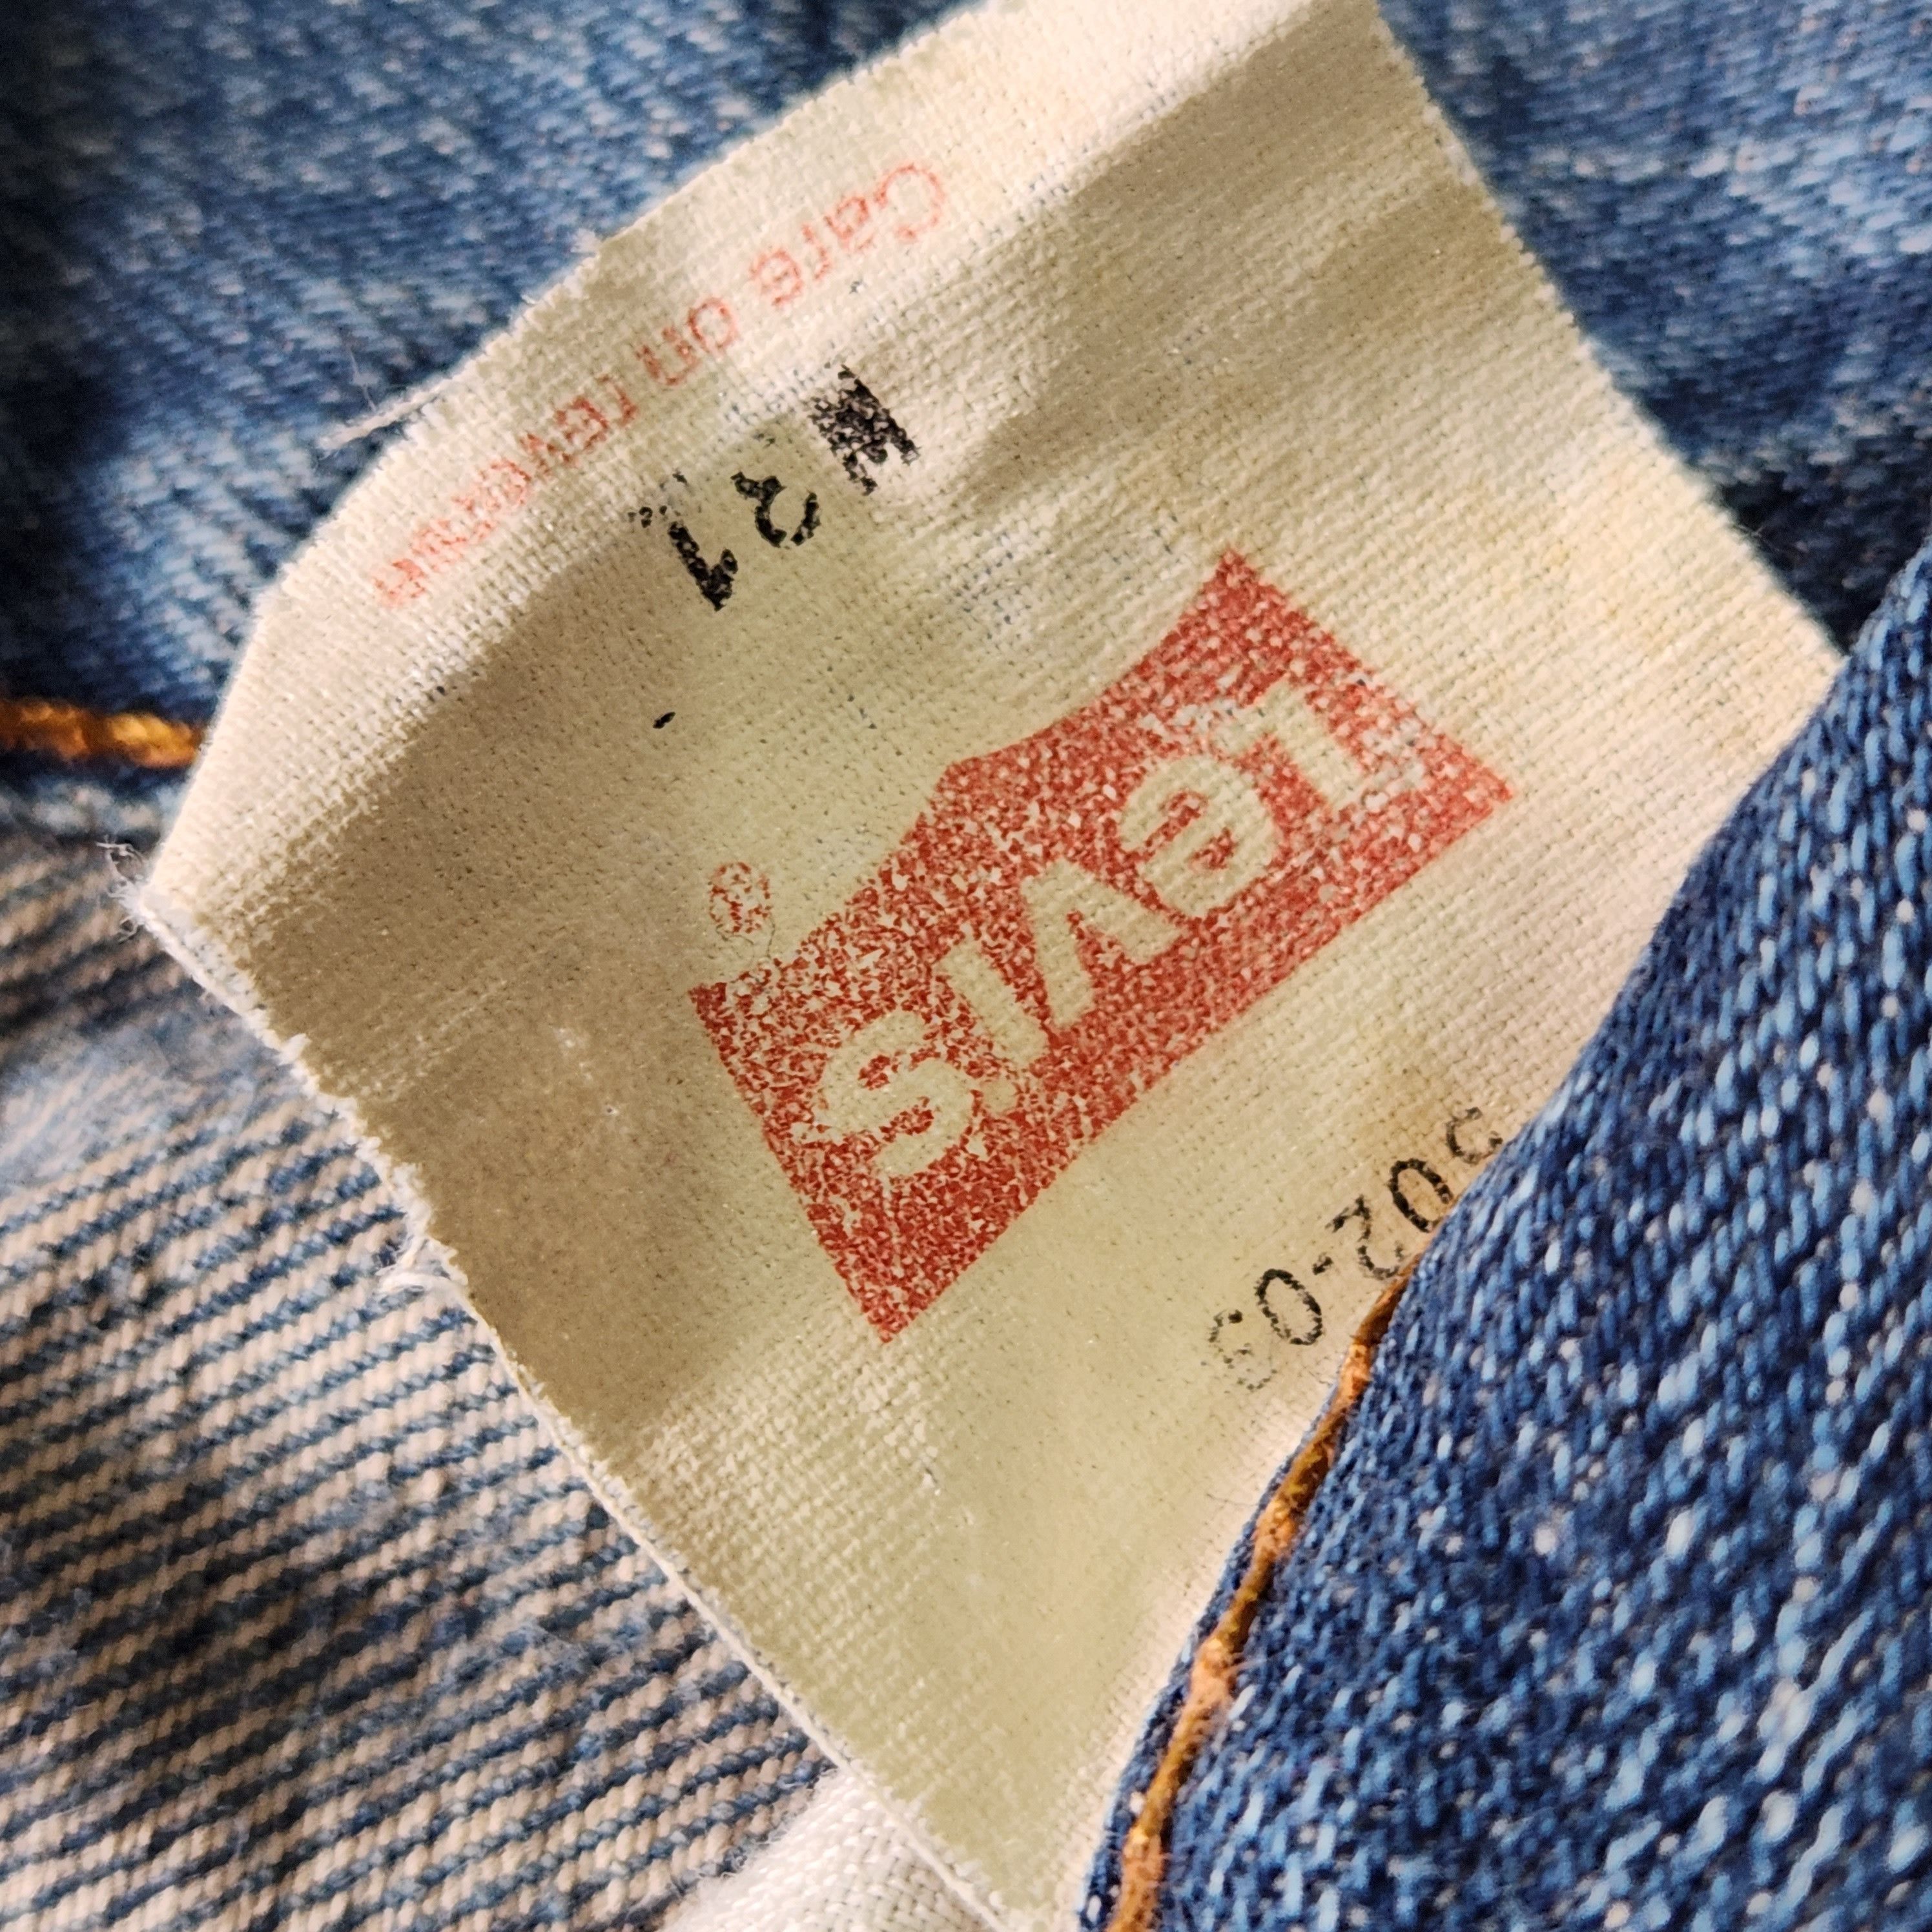 Levis 502 Vintage Distressed Ripped Denim Jeans Year 2002 - 11